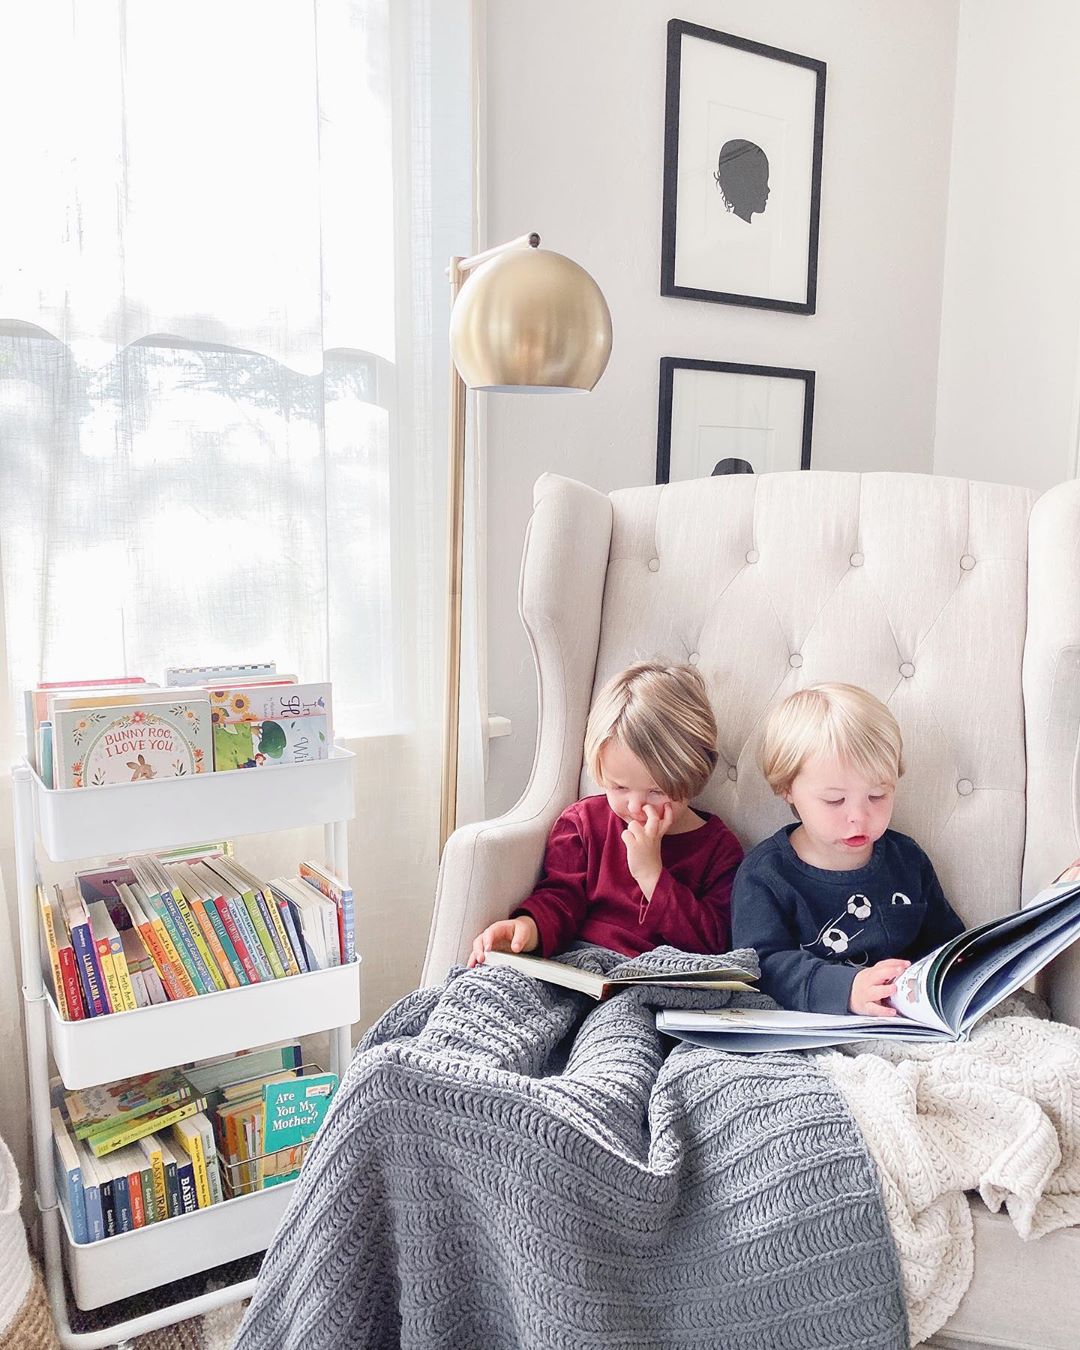 Little Kids Sitting Together Reading Books. Photo by Instagram user @brittanysbookclub